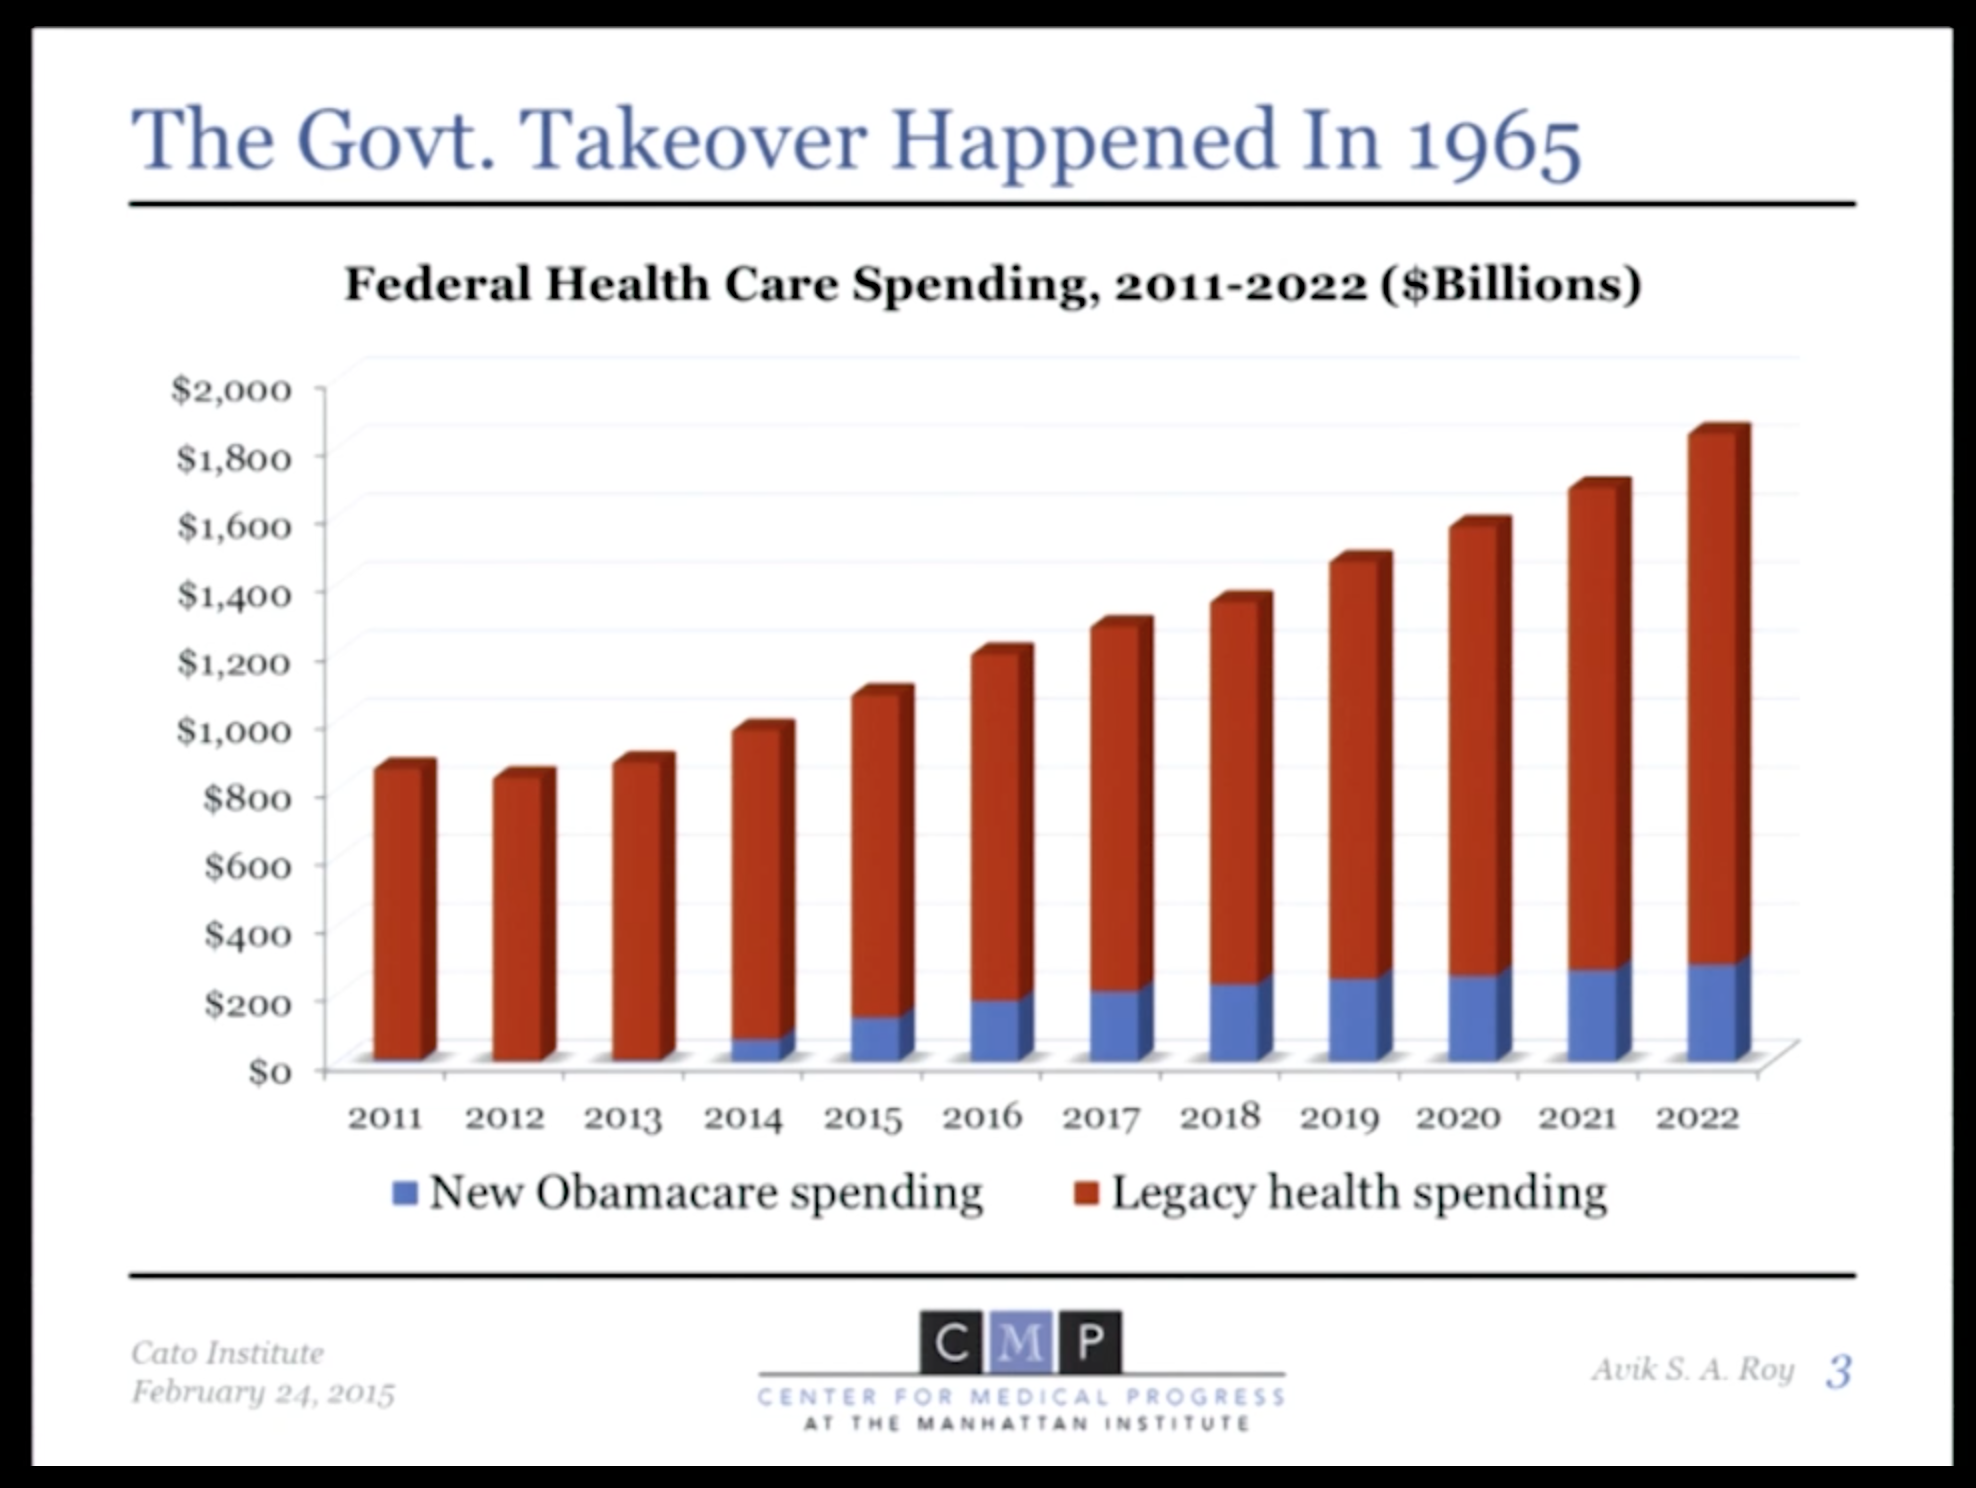 governemnt takeover of healthcare 1965